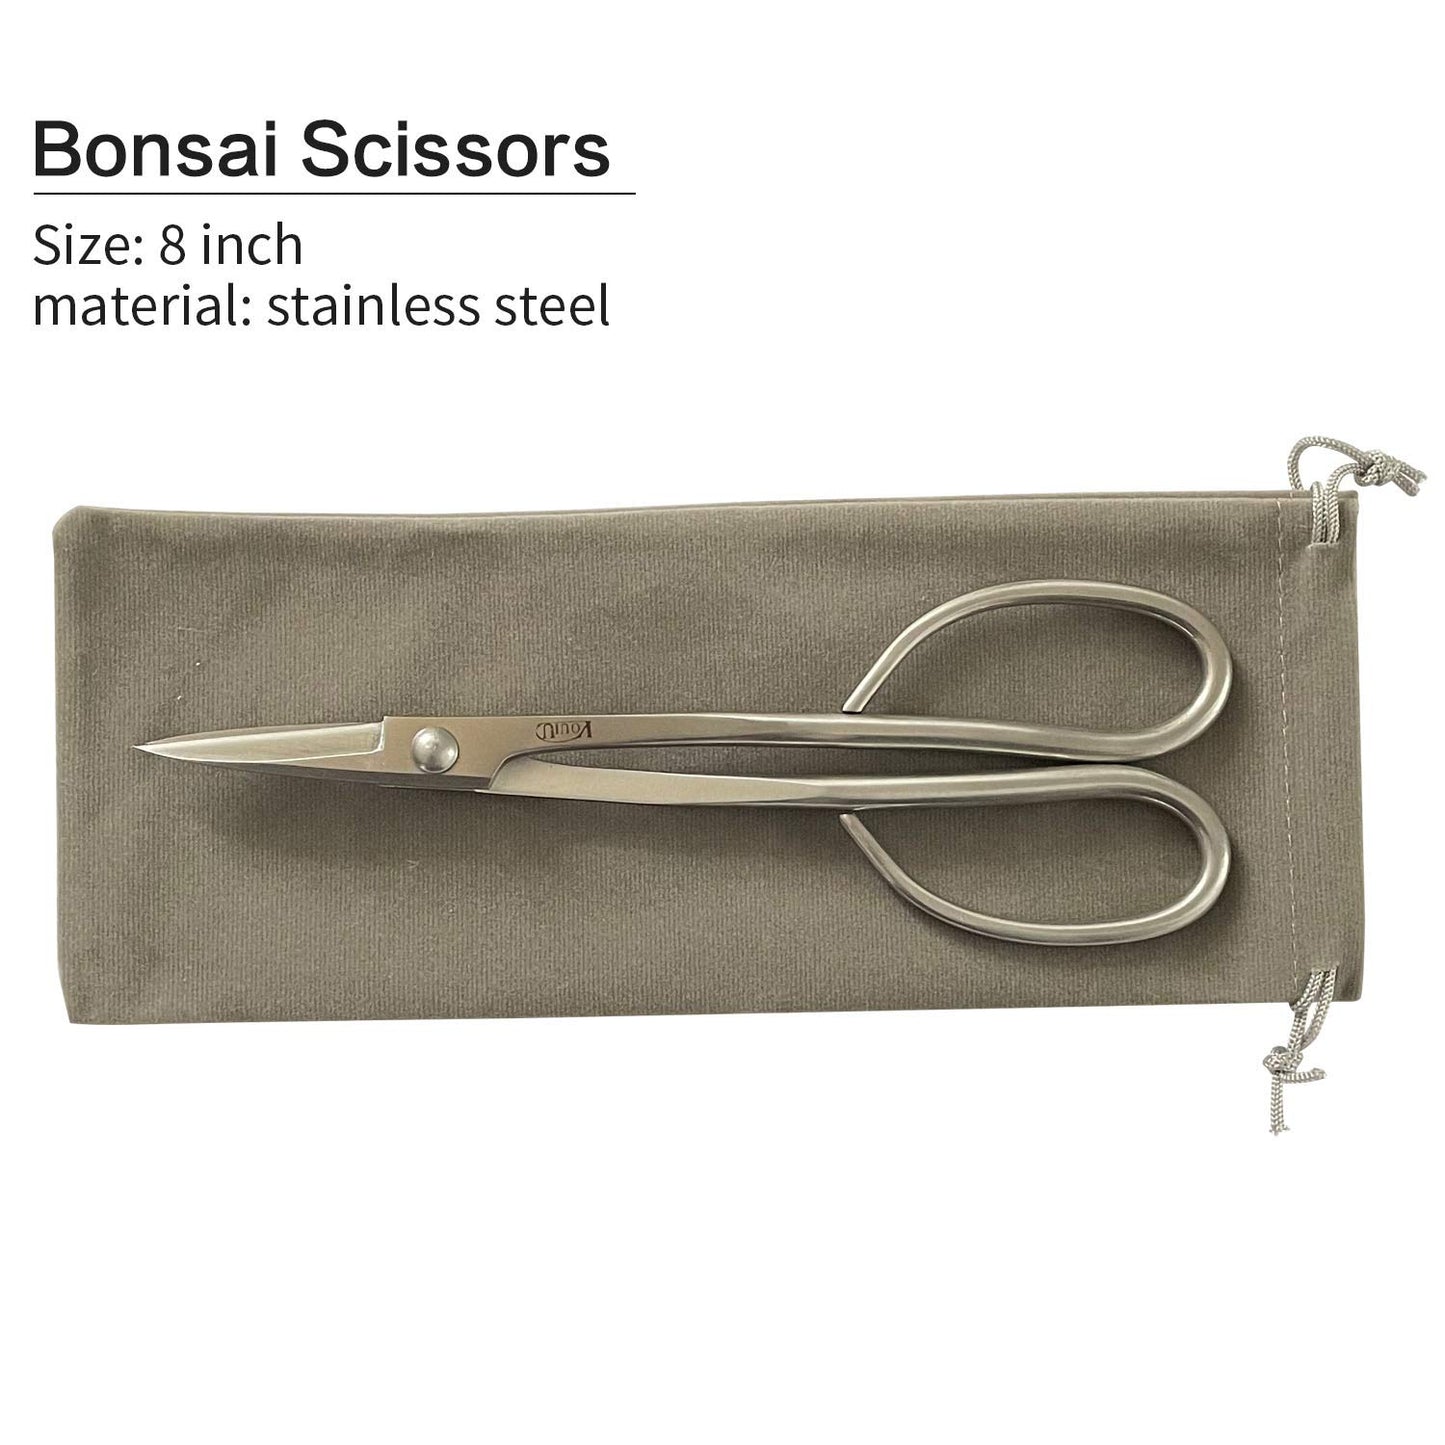 Bonsai Scissors - Quality Stainless Steel - Chinese Made